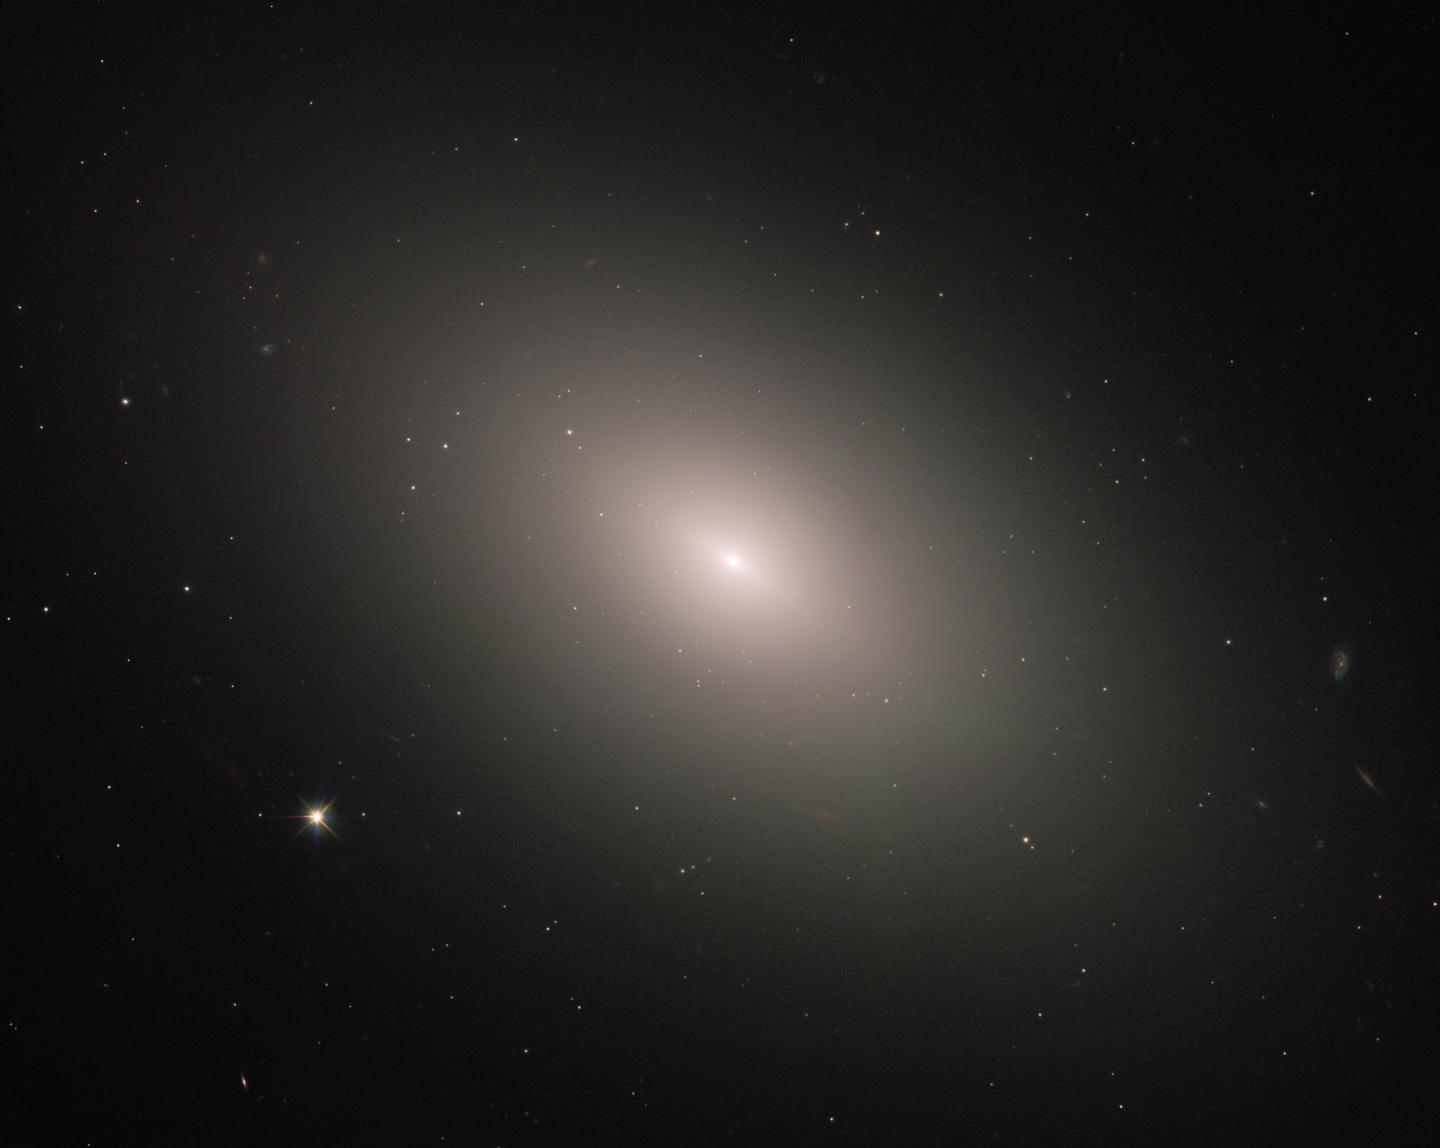 Hubble Sees a Galaxy Bucking the Trend